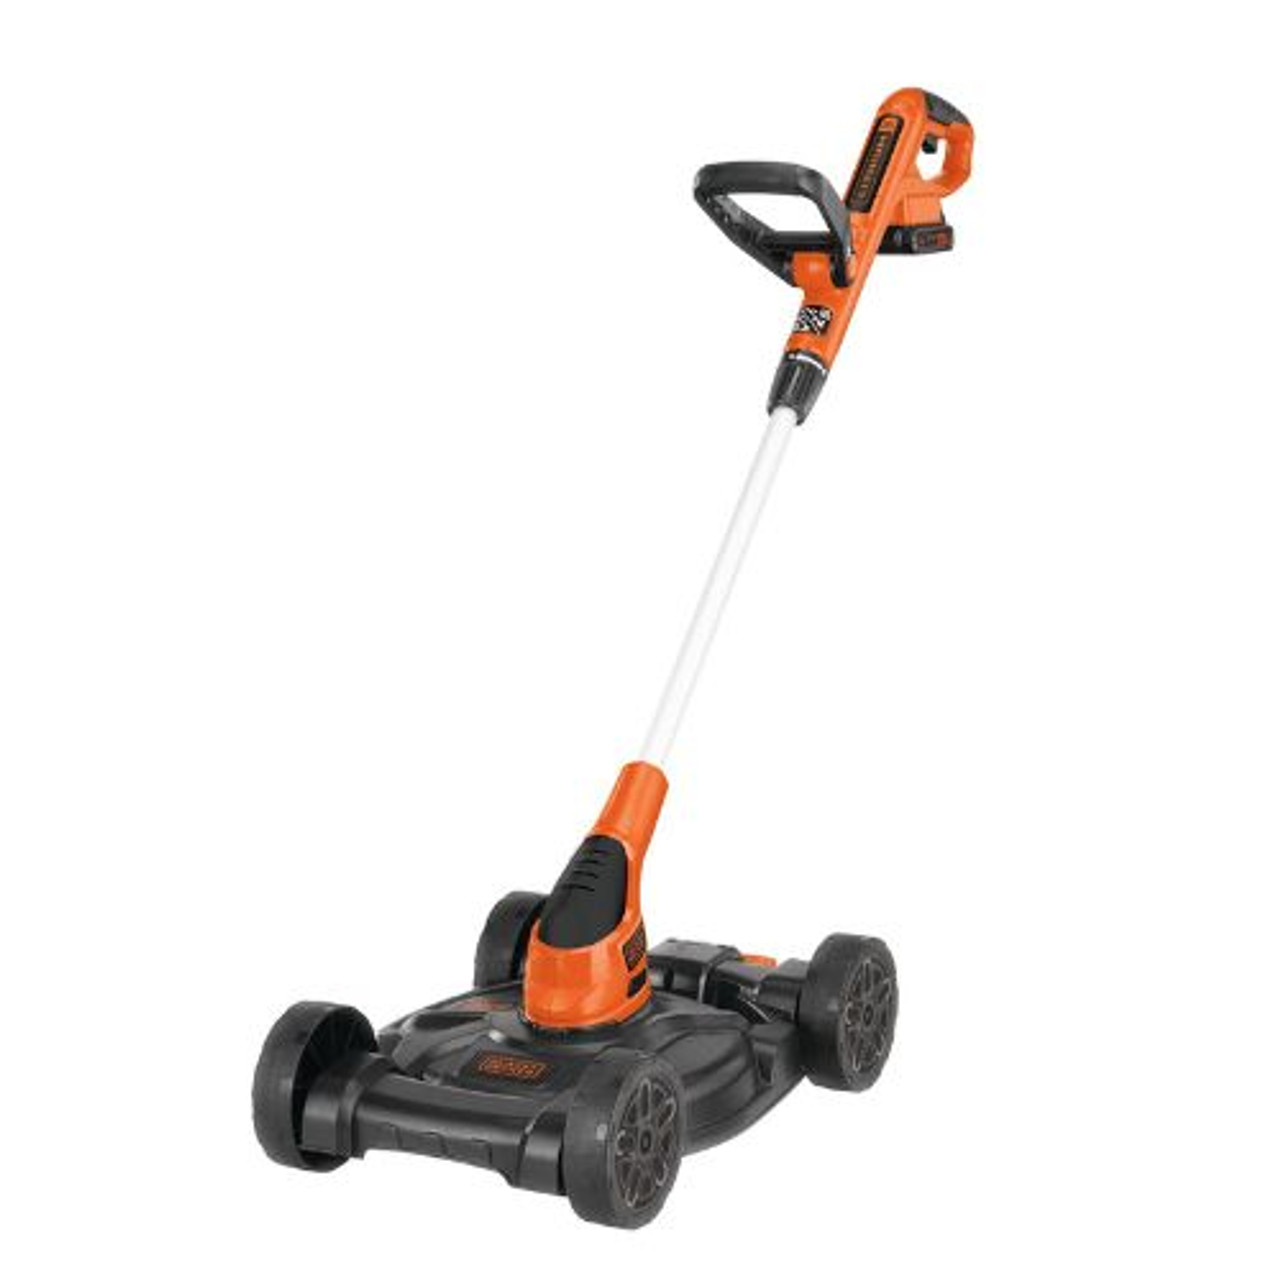  Decker LSW321 20V Max Lithium Powerboost Sweeper - Black